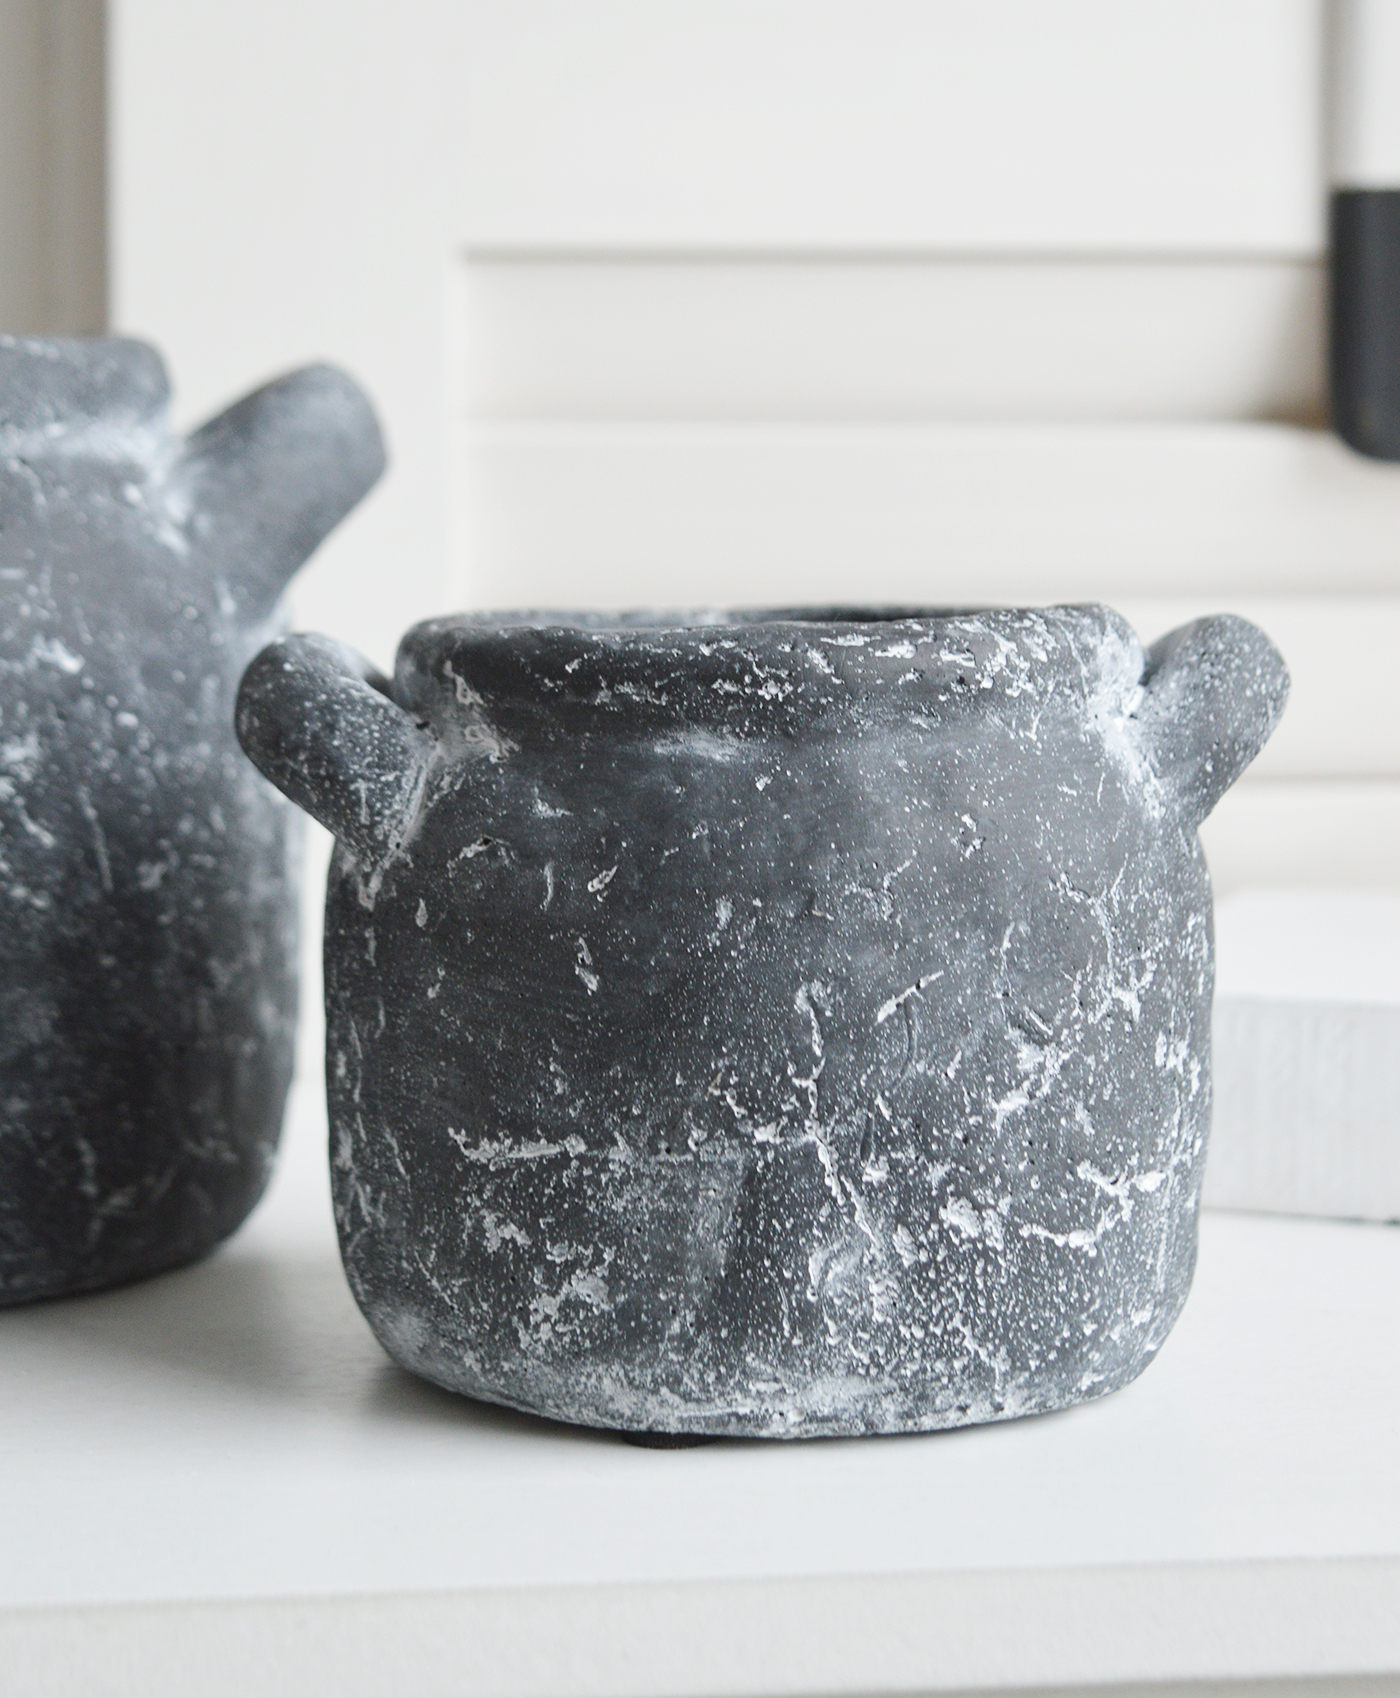 Newfane small stone pots, ideal for styling in New England styled homes for coastal, country and modern farmhouse interiors, complementing and contrasting the furniture